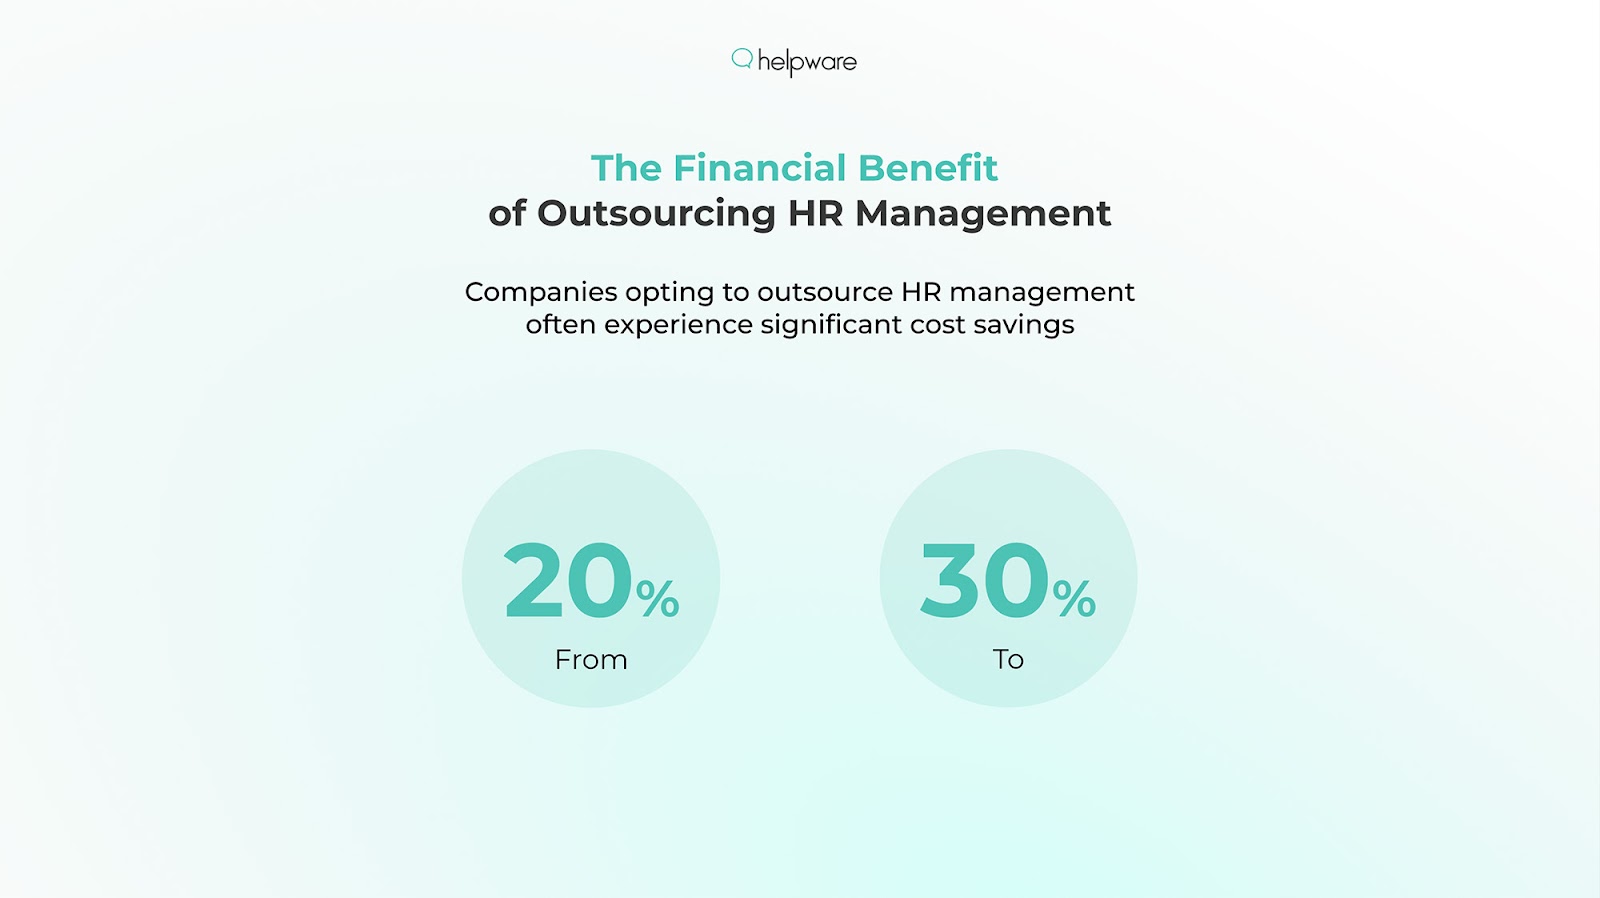 The Financial Benefit of Outsourcing HR Management